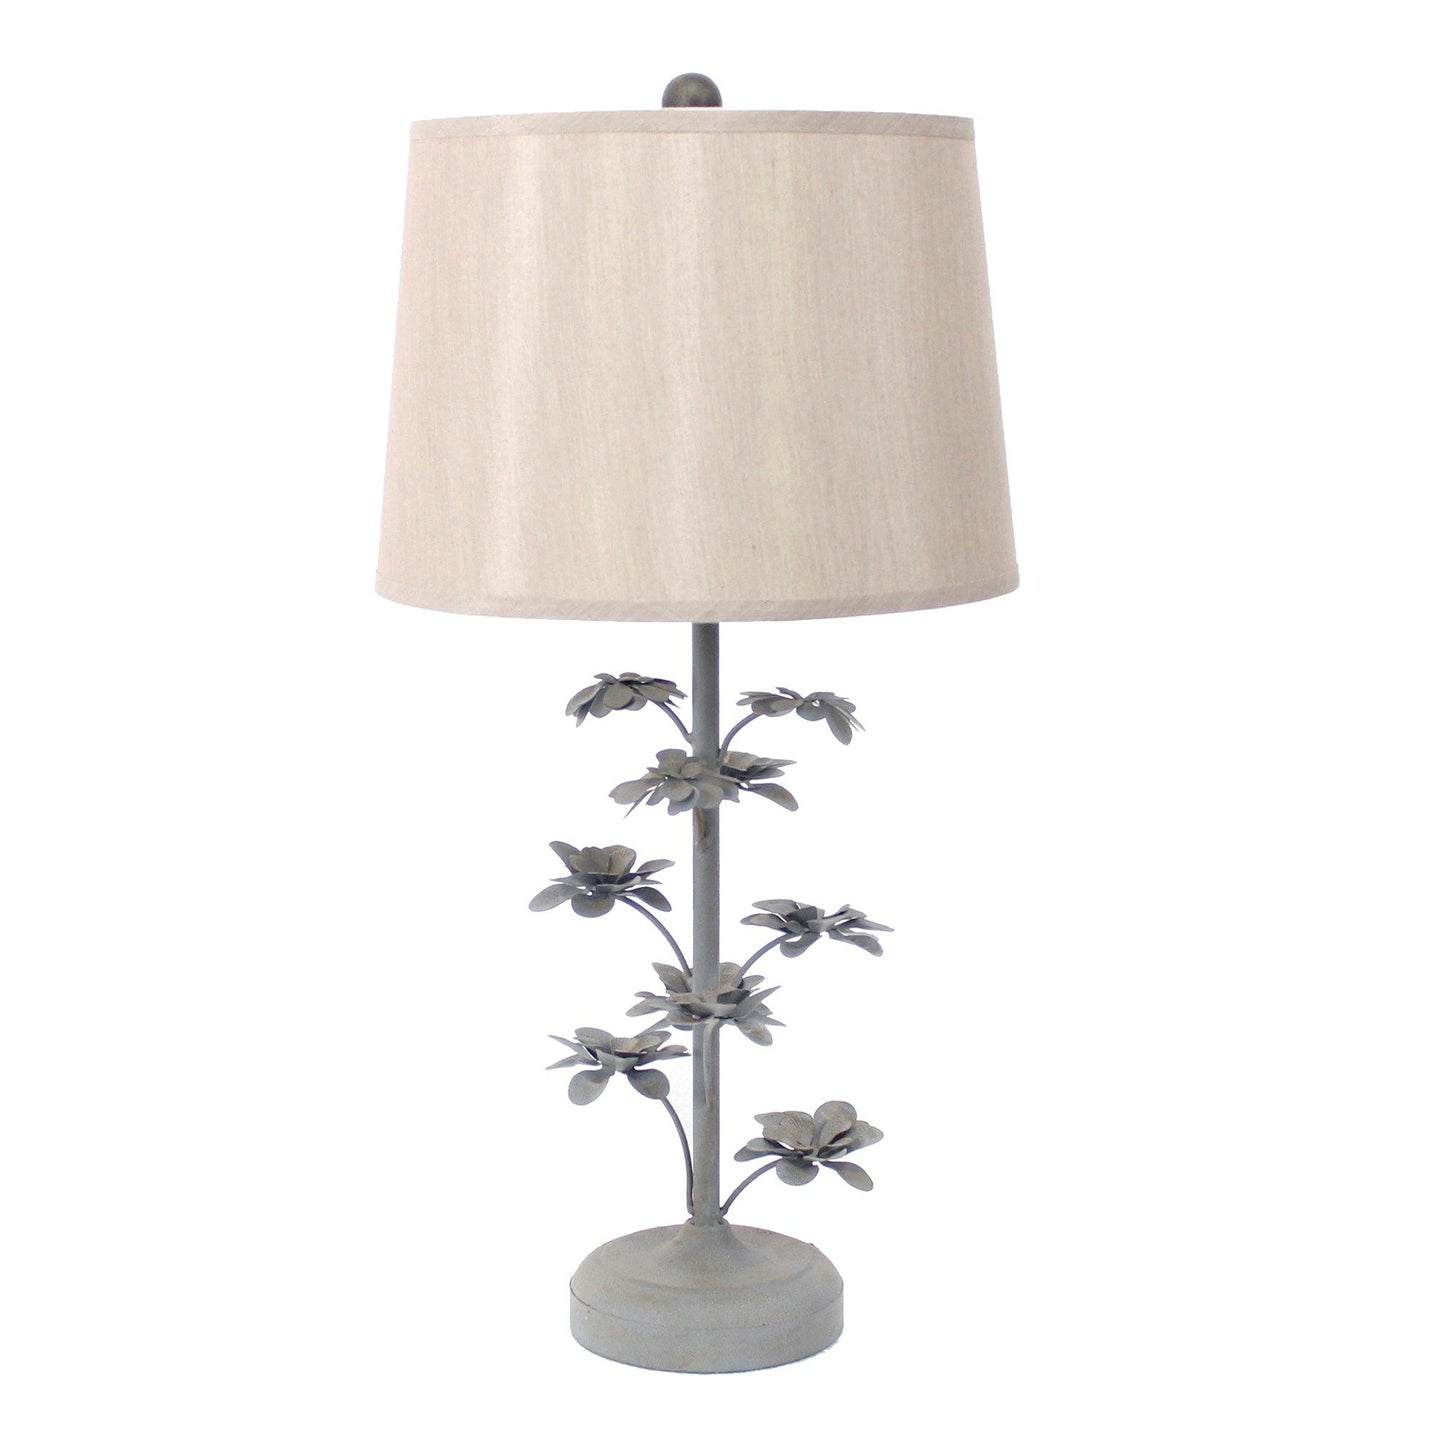 8 x 12 x 28 Gray Rustic Flowering Tree - Table Lamp - AFS